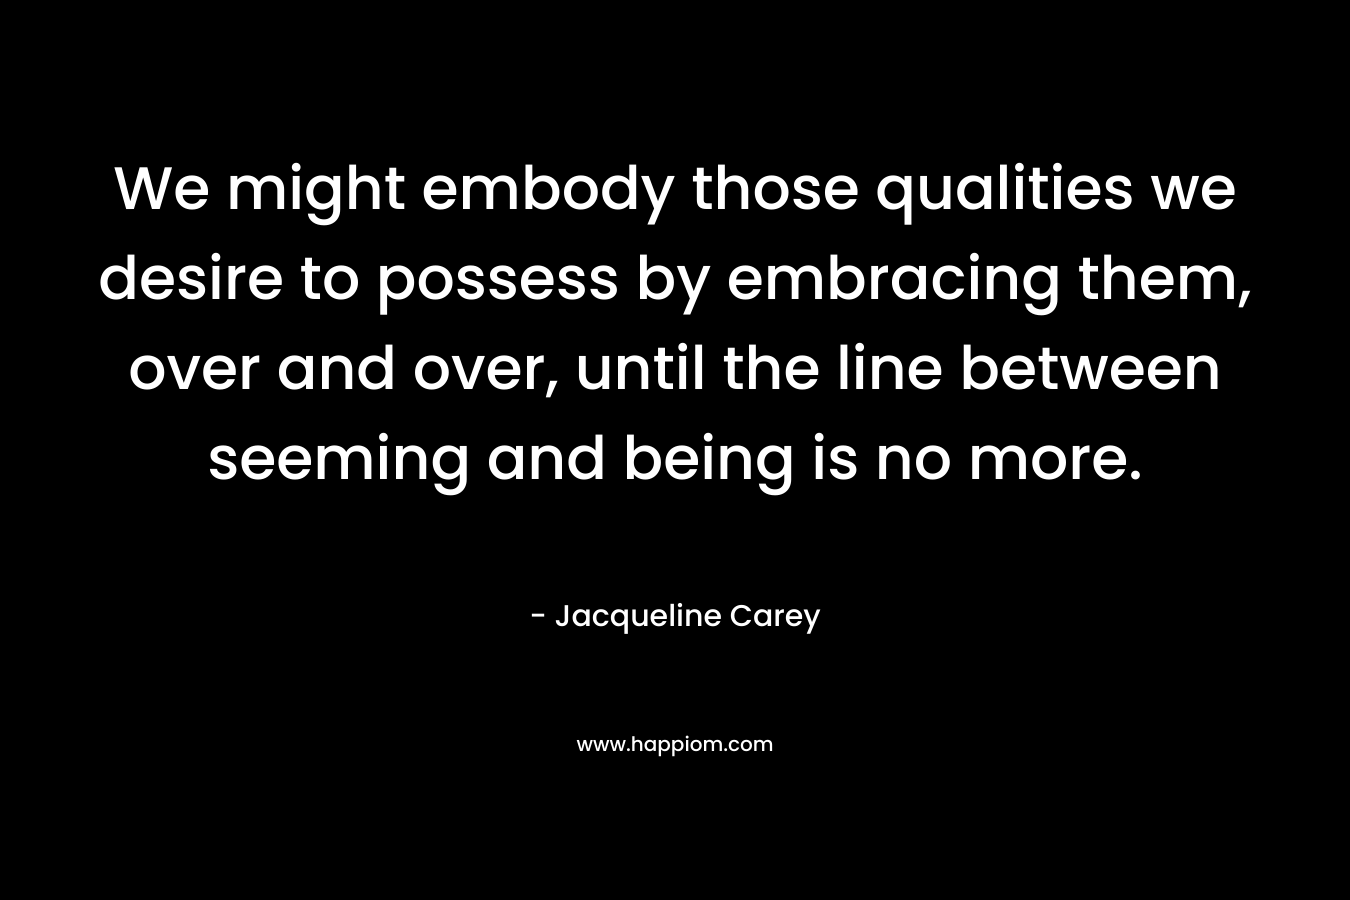 We might embody those qualities we desire to possess by embracing them, over and over, until the line between seeming and being is no more.